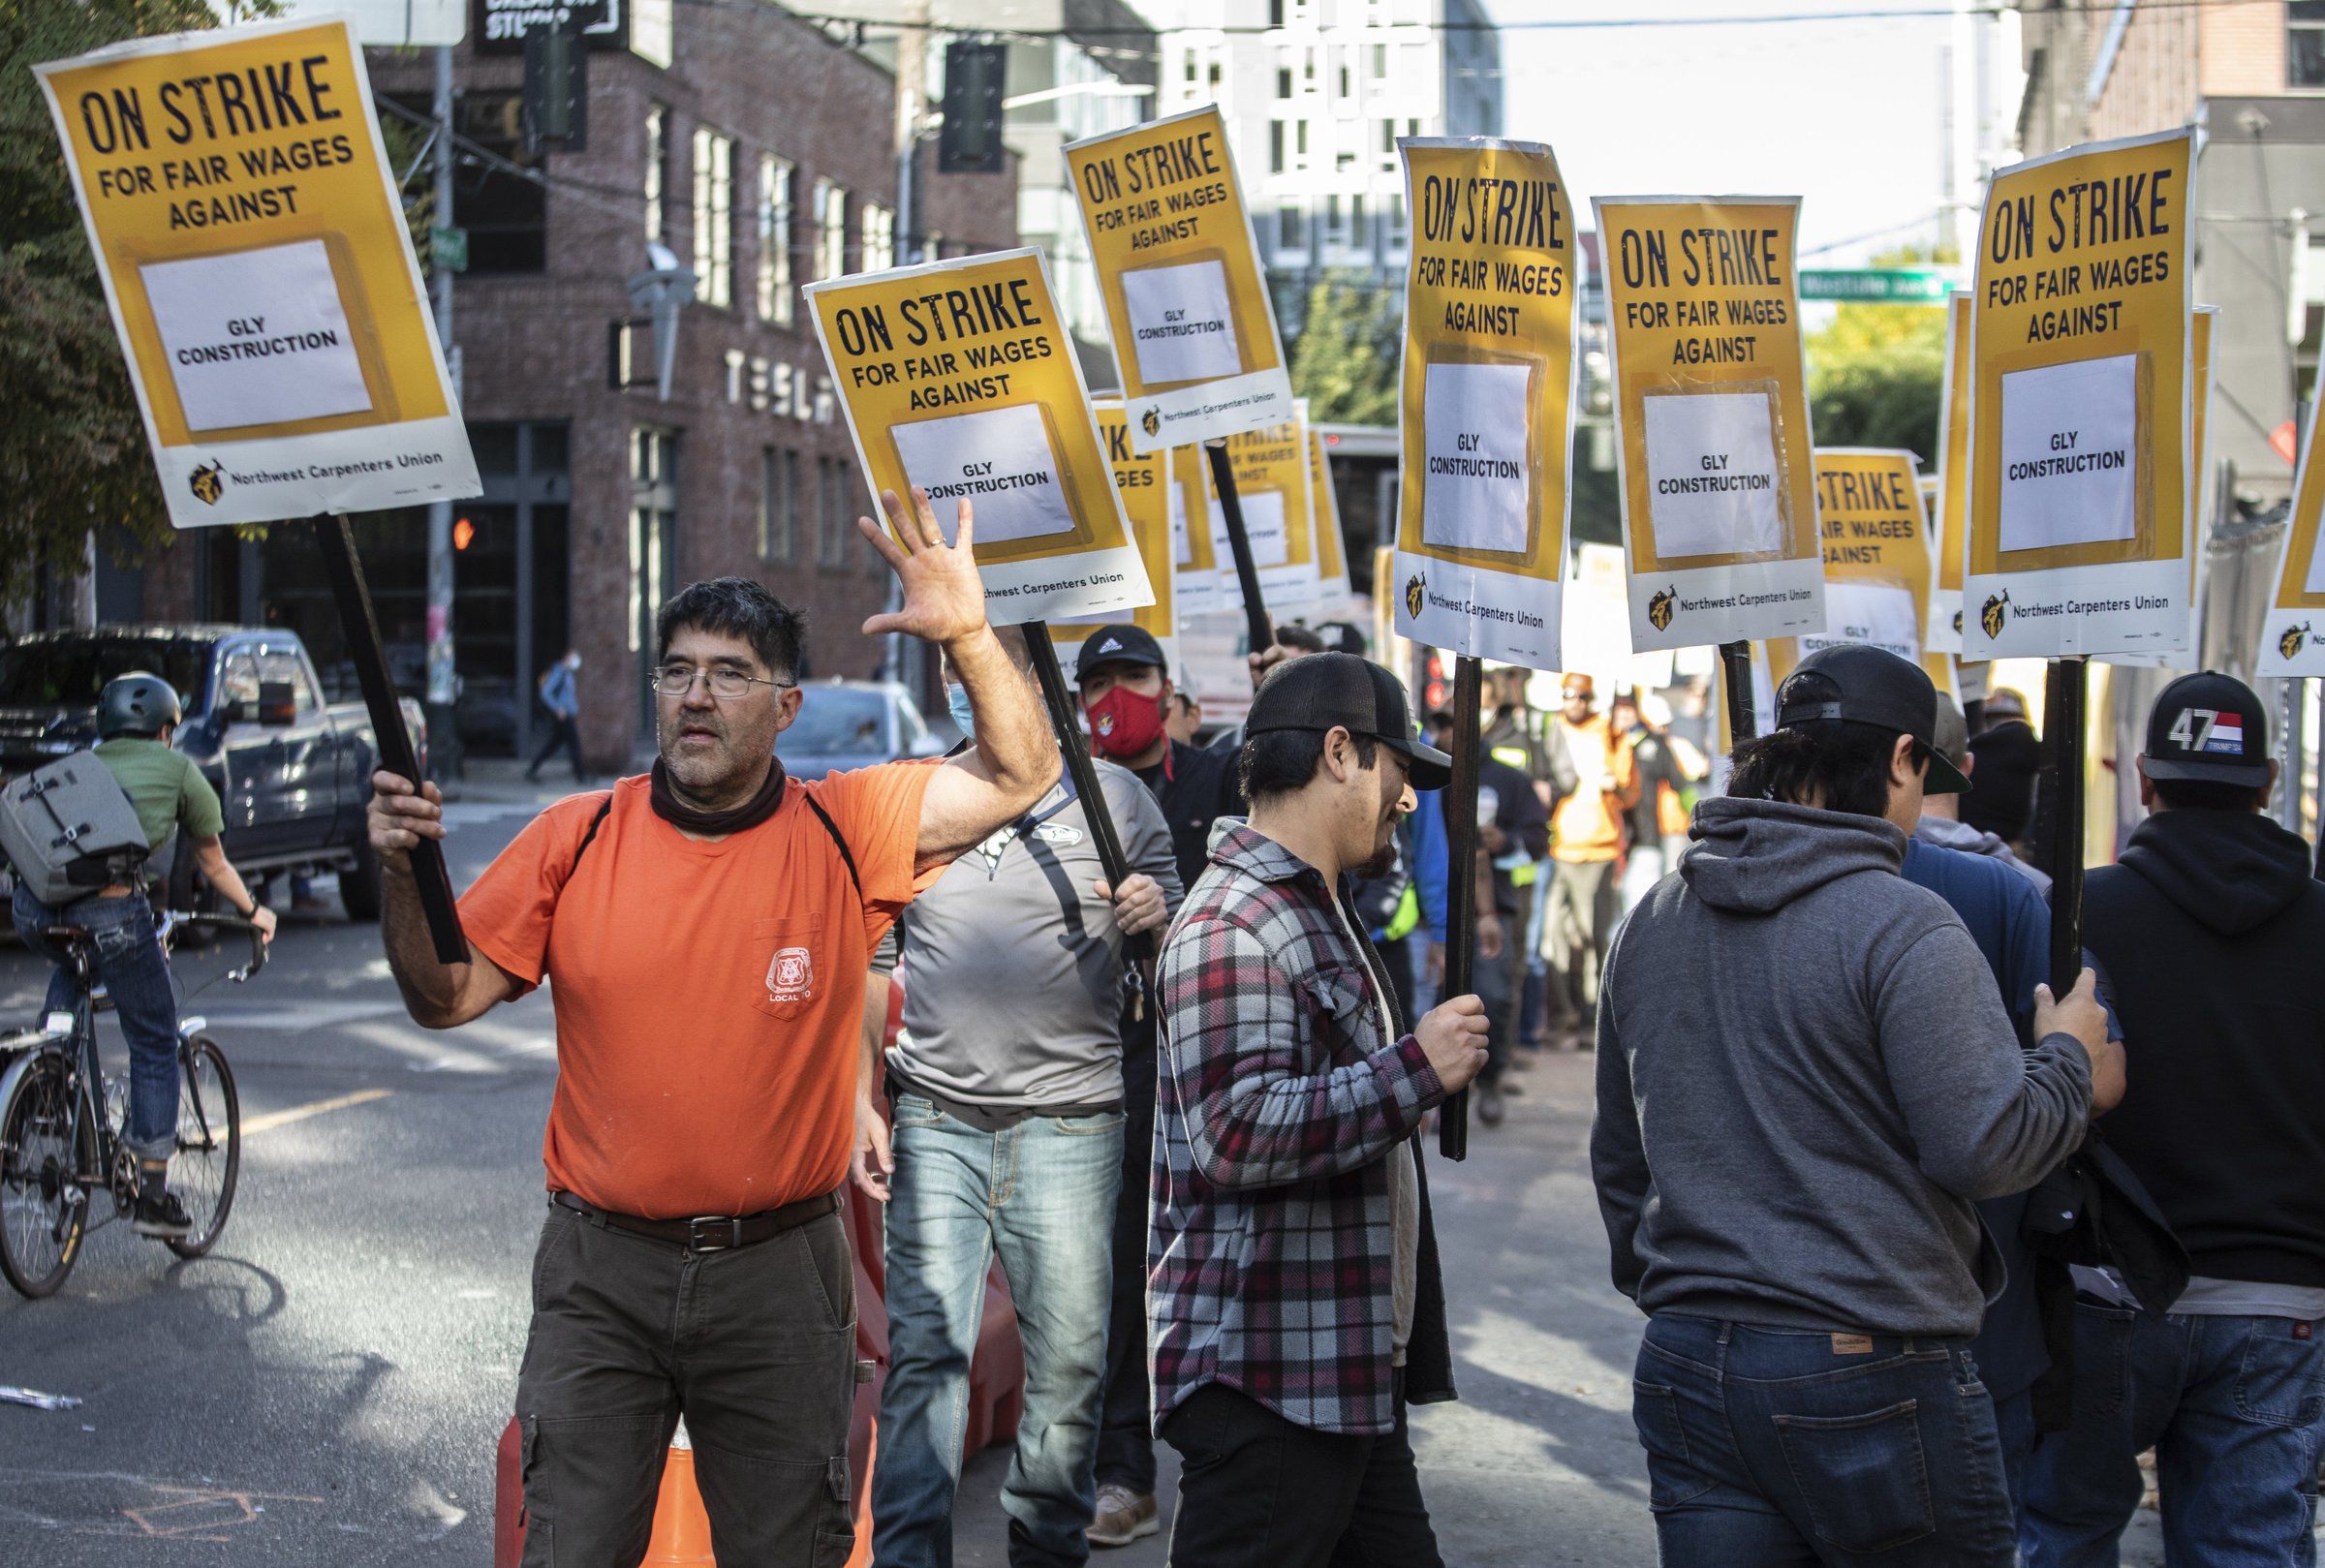 Carpenters approve contract, end strike that slowed Seattle-area